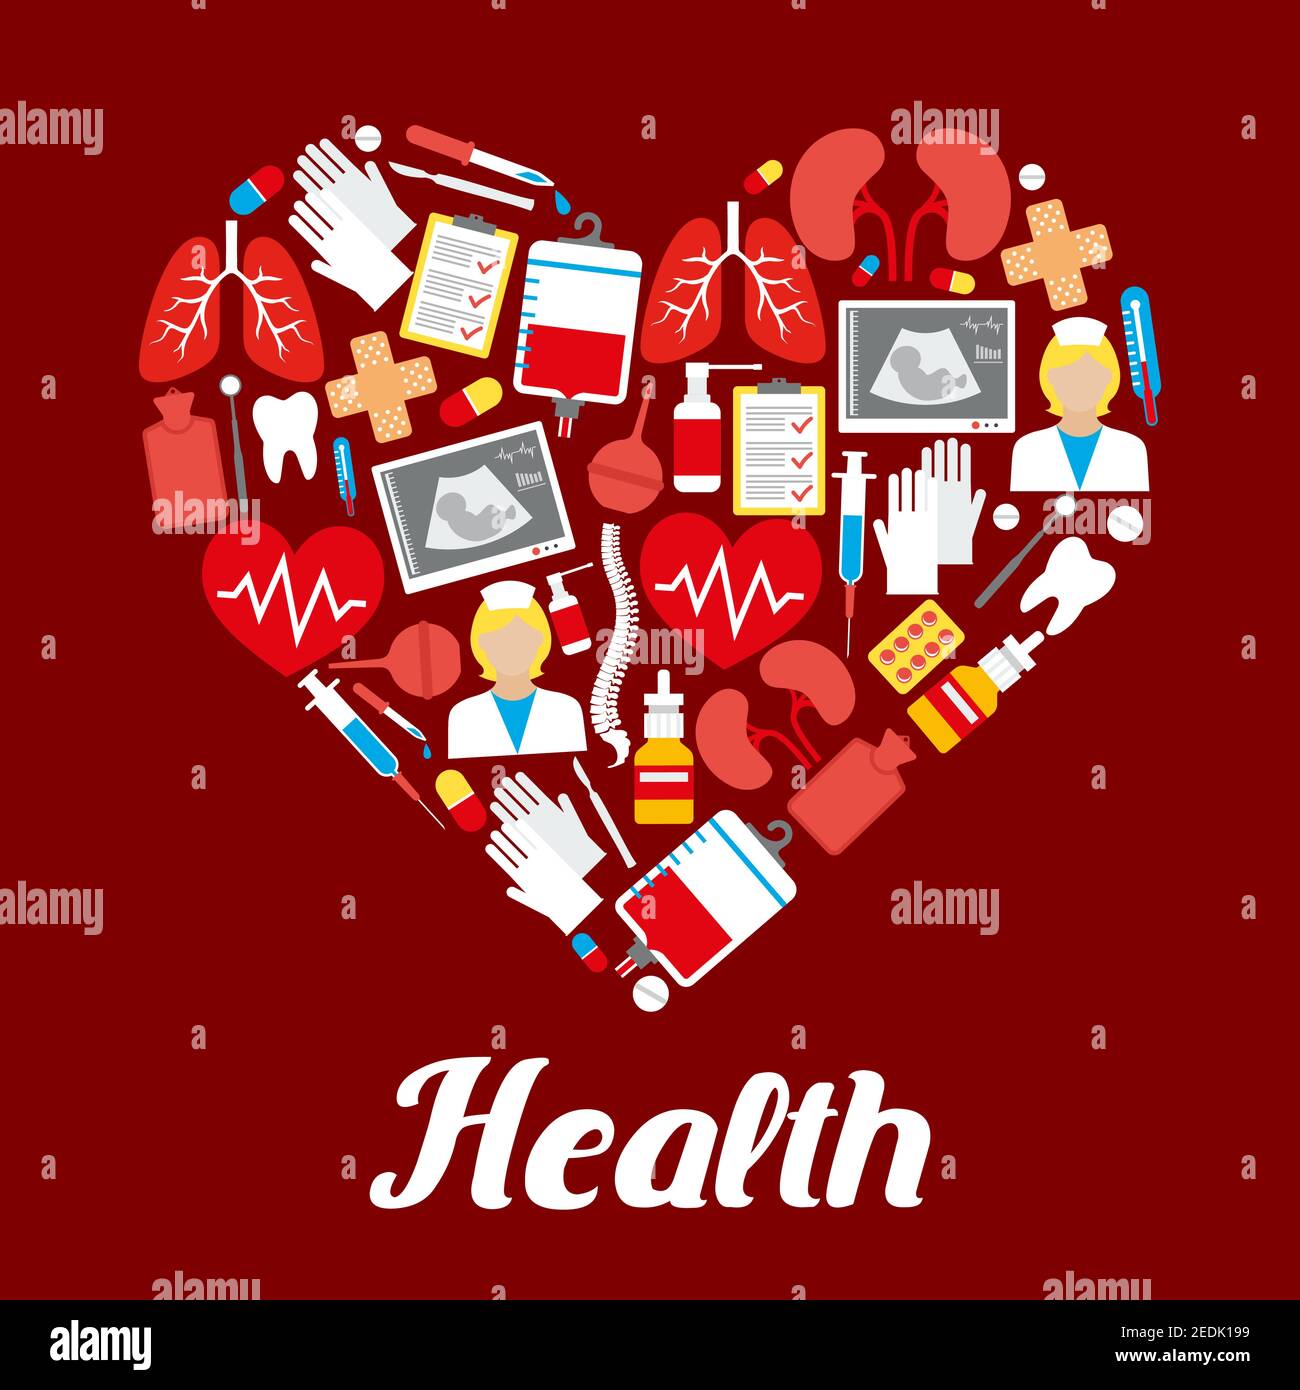 Heart poster or vector medicines and medical items of healthcare drugs, syringe, therapy and dentistry instruments, lungs and kidney human organs, spi Stock Vector